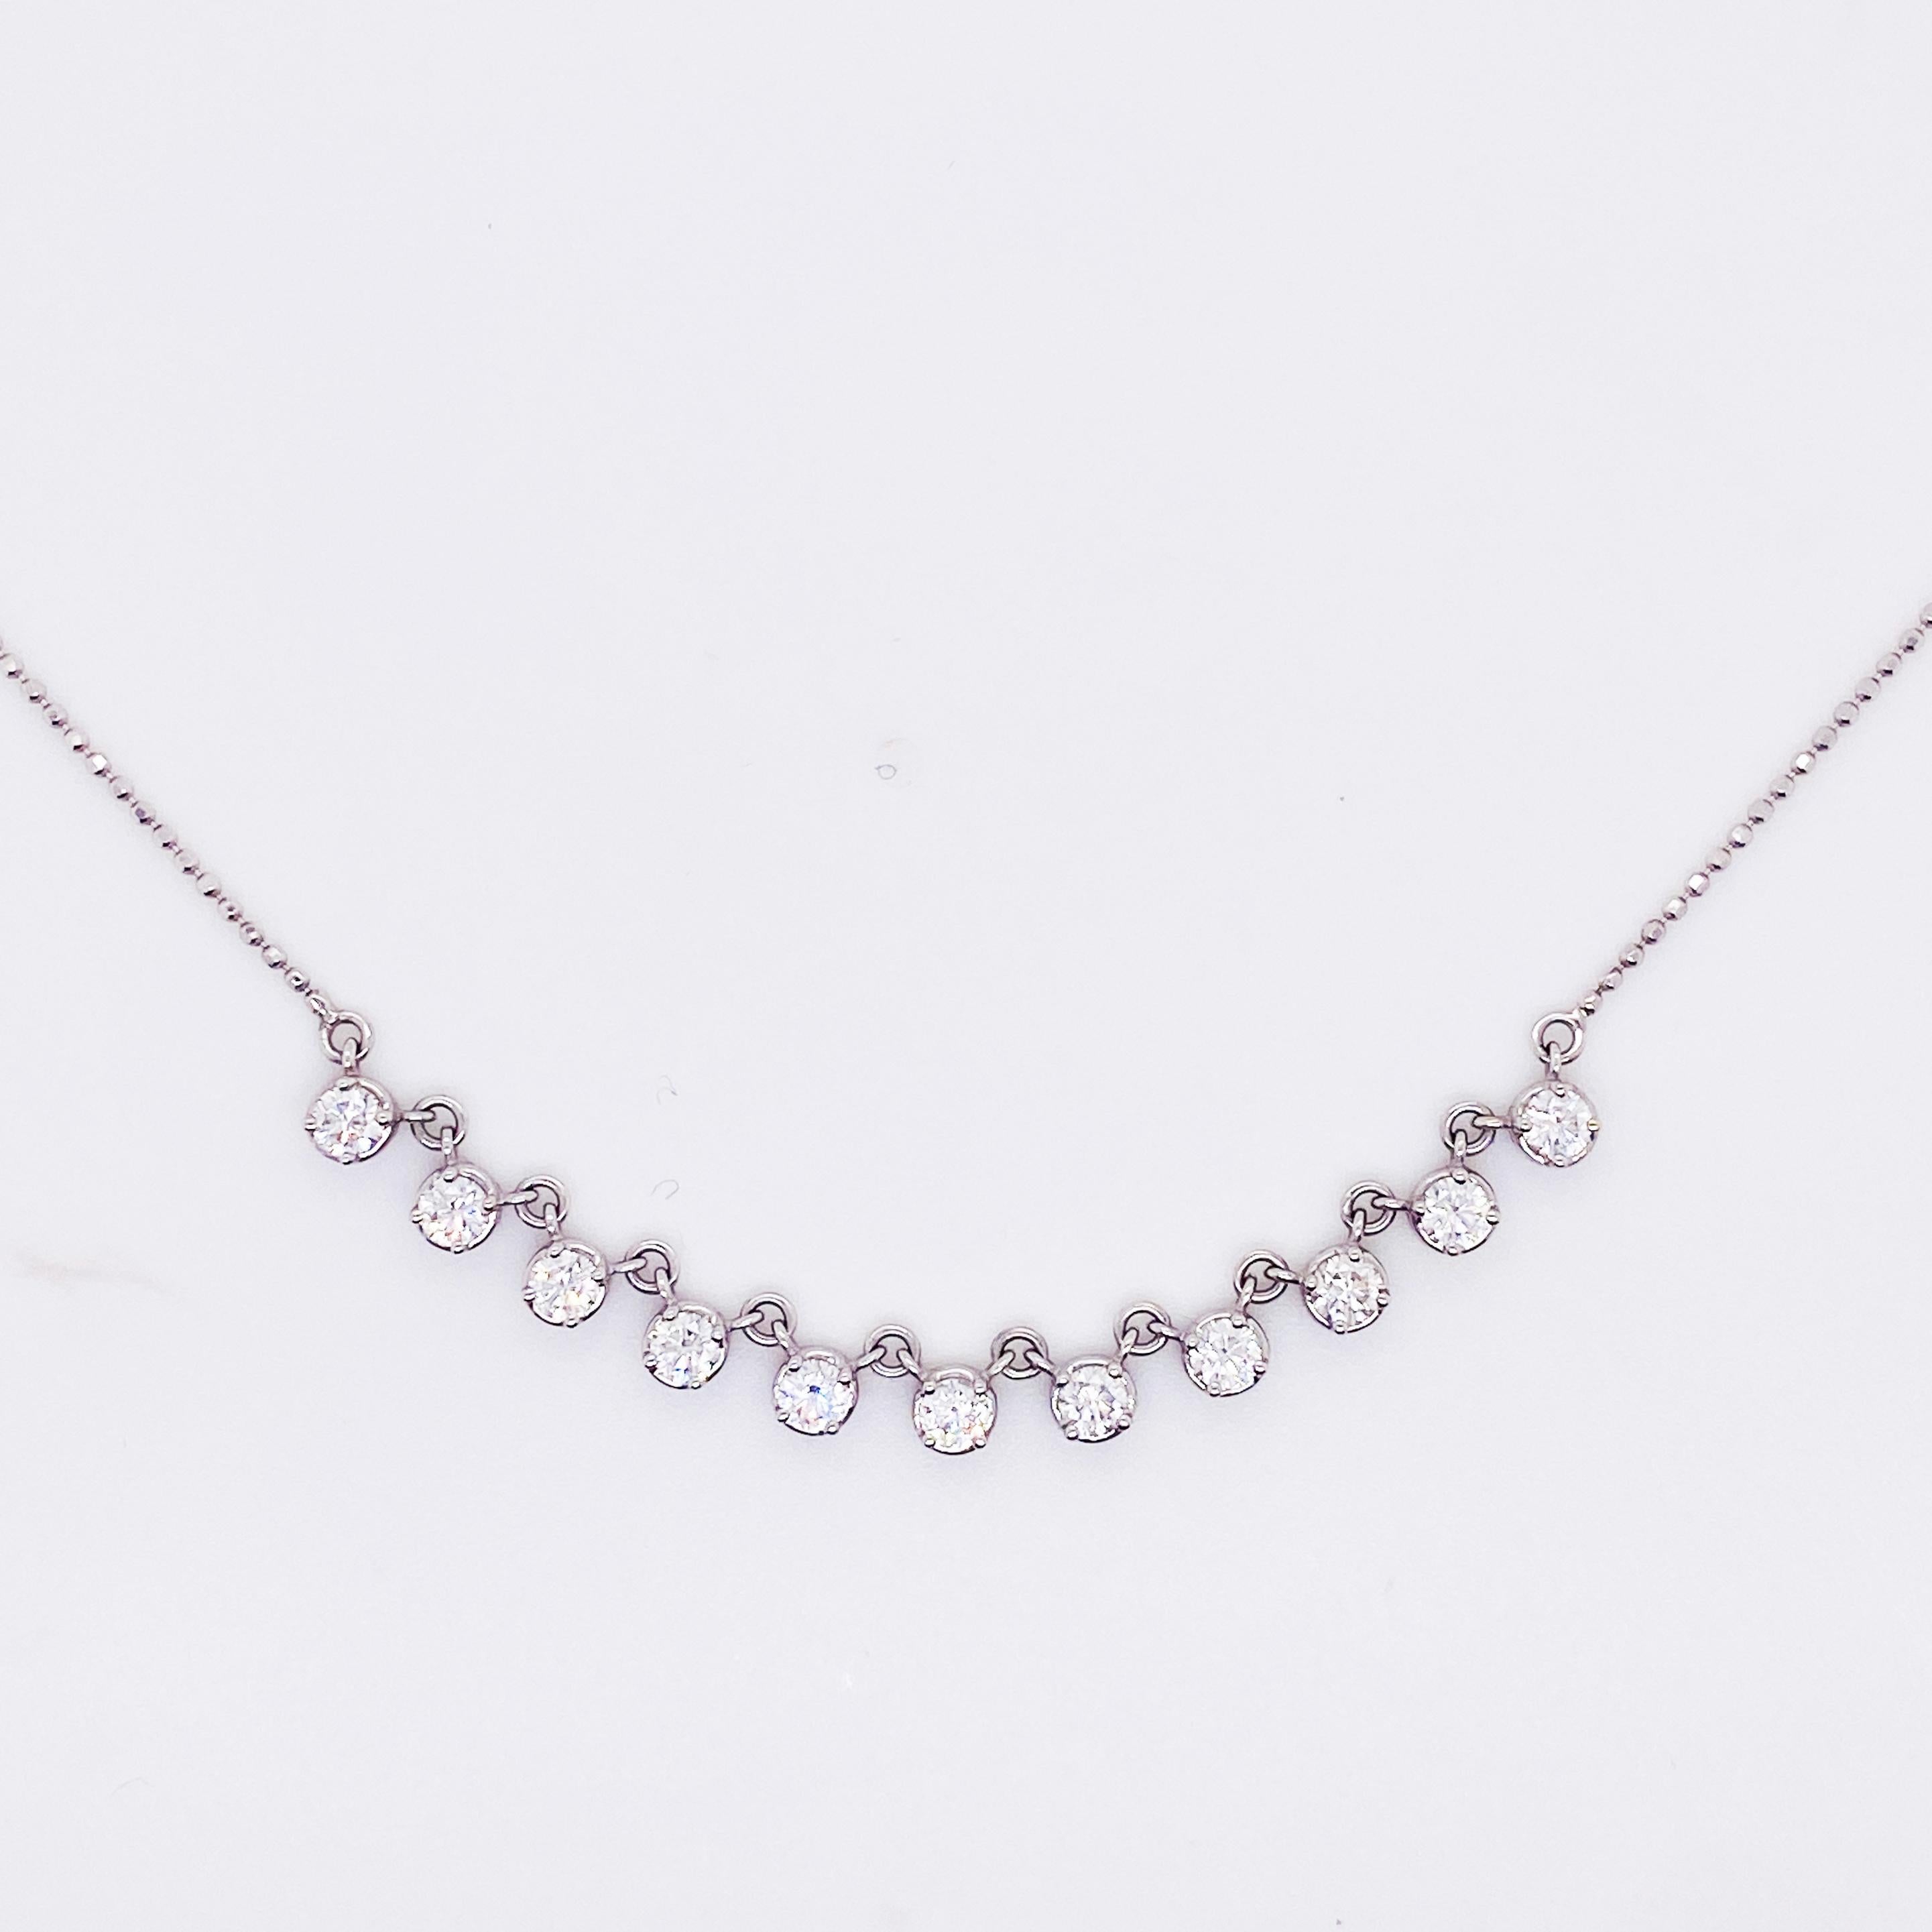 Contemporary Fancy Link Diamond 0.88Carat Necklace 14K White Gold Beaded Chain Riviera Tennis For Sale